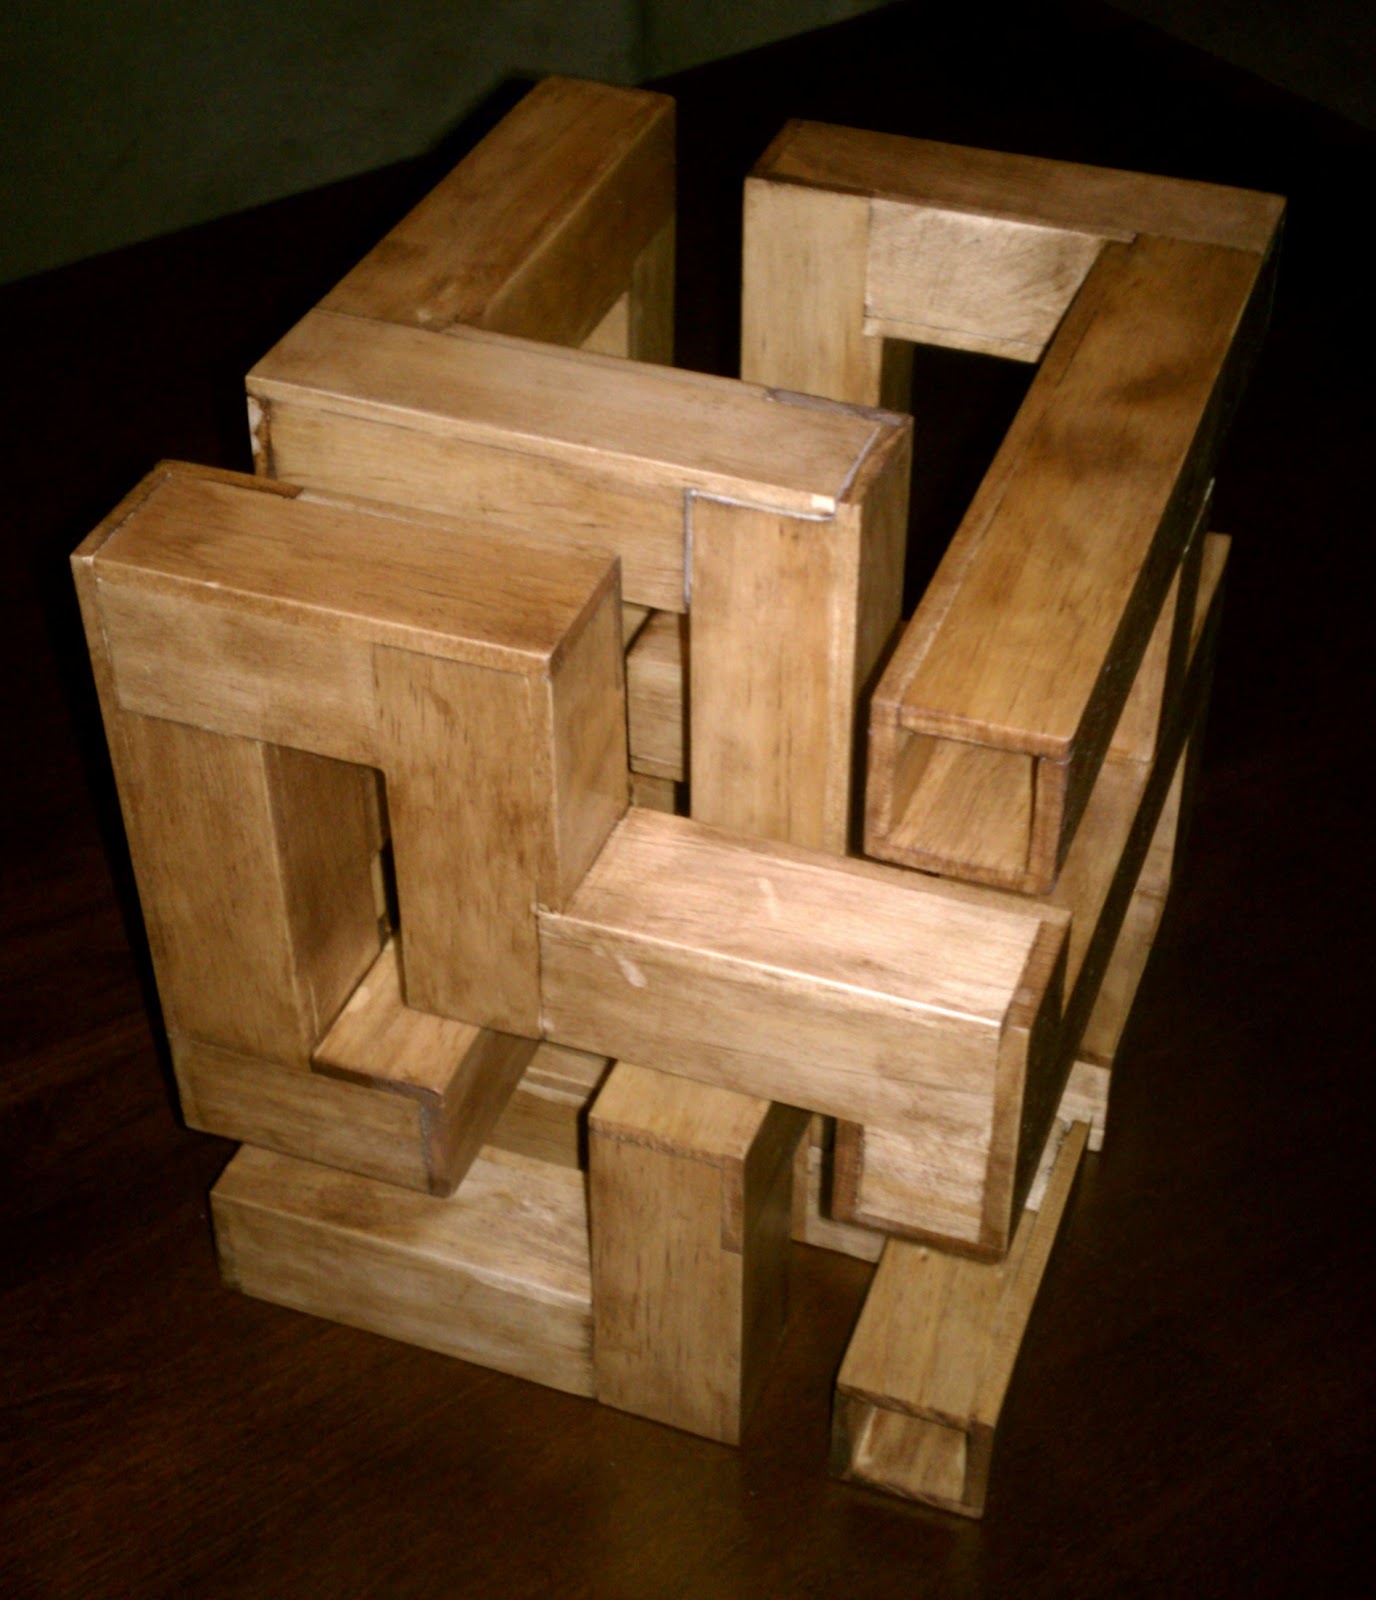 Trash Can Shed Plan: How To Make A Wooden Puzzle Box 